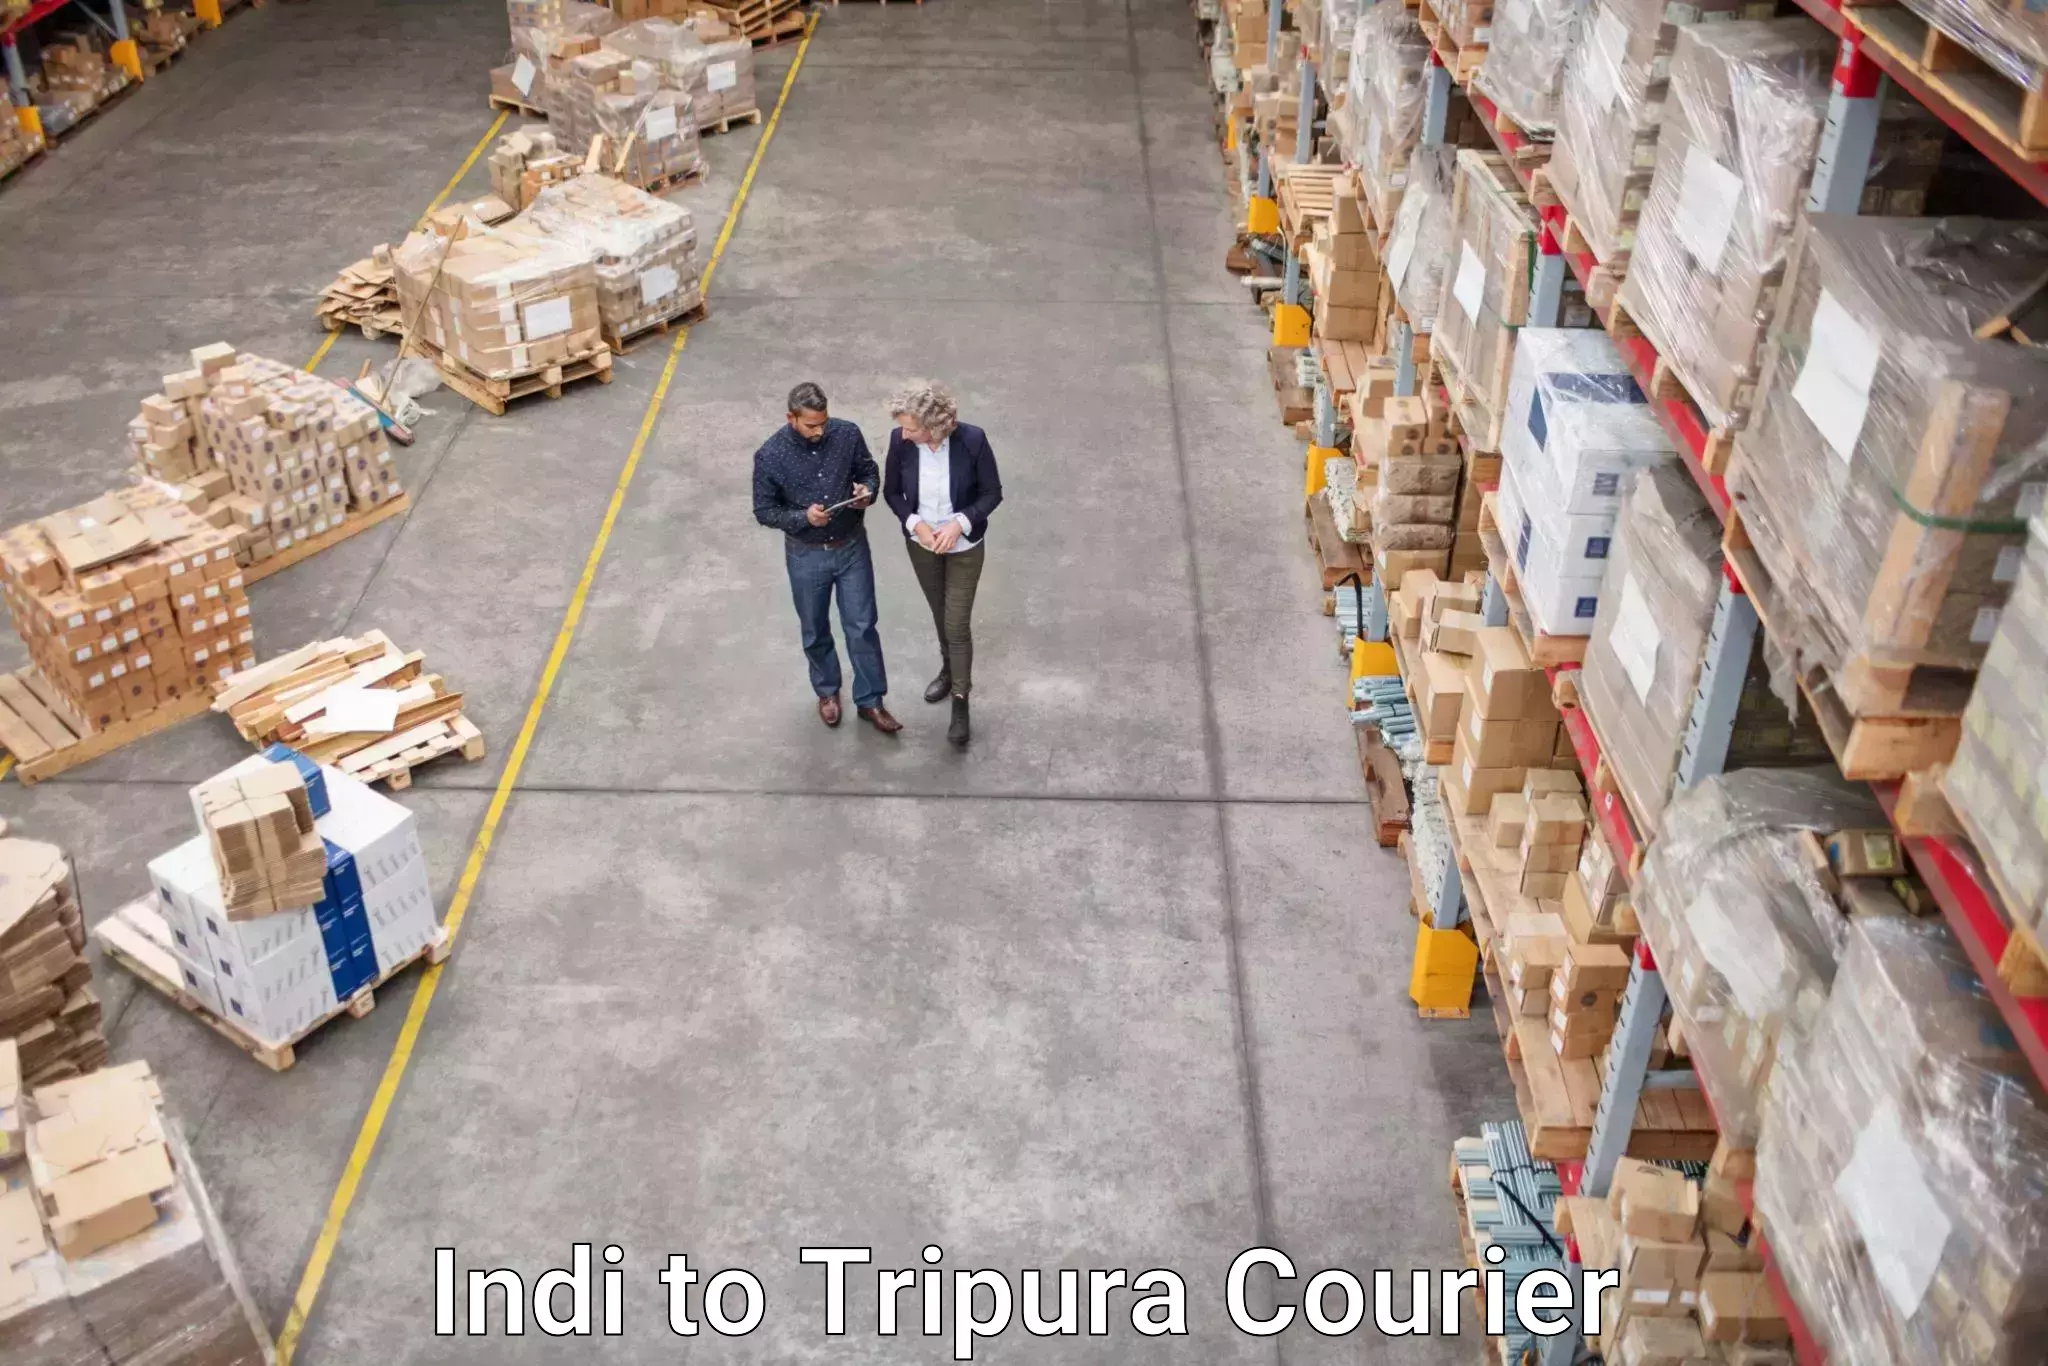 Local courier options Indi to Tripura